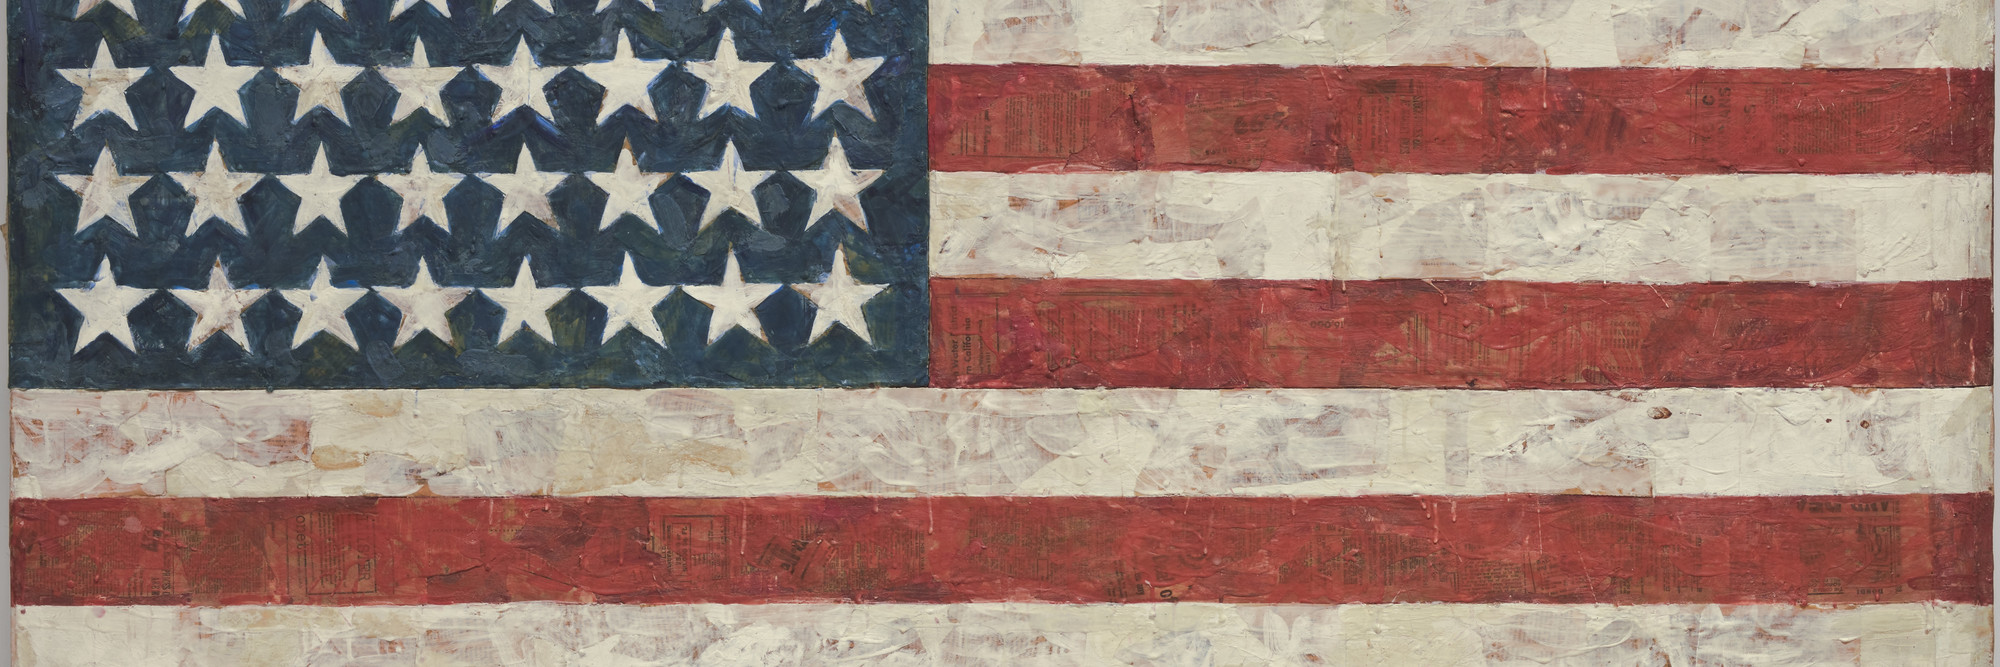 Jasper Johns. Flag. 1954–55 (dated on reverse 1954). Encaustic, oil, and collage on fabric mounted on plywood, three panels, 42 1/4 × 60 5/8″ (107.3 × 153.8 cm). Gift of Philip Johnson in honor of Alfred H. Barr, Jr. © 2016 Jasper Johns / Licensed by VAGA, New York, NY